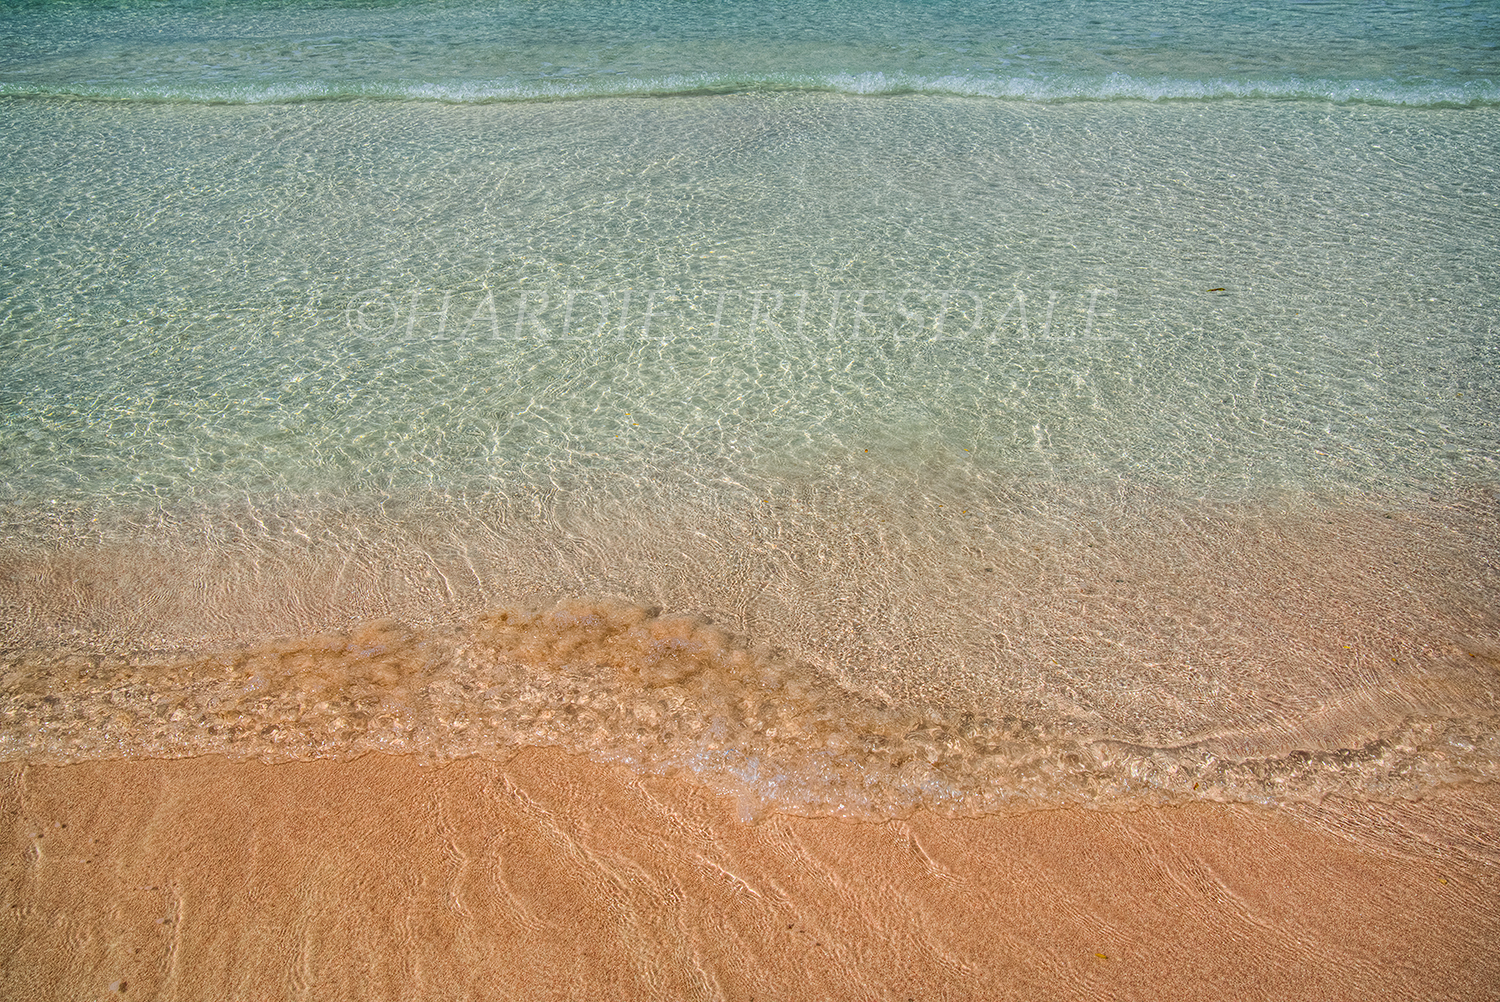 Barb#006 "Water and Sand, Barbados"